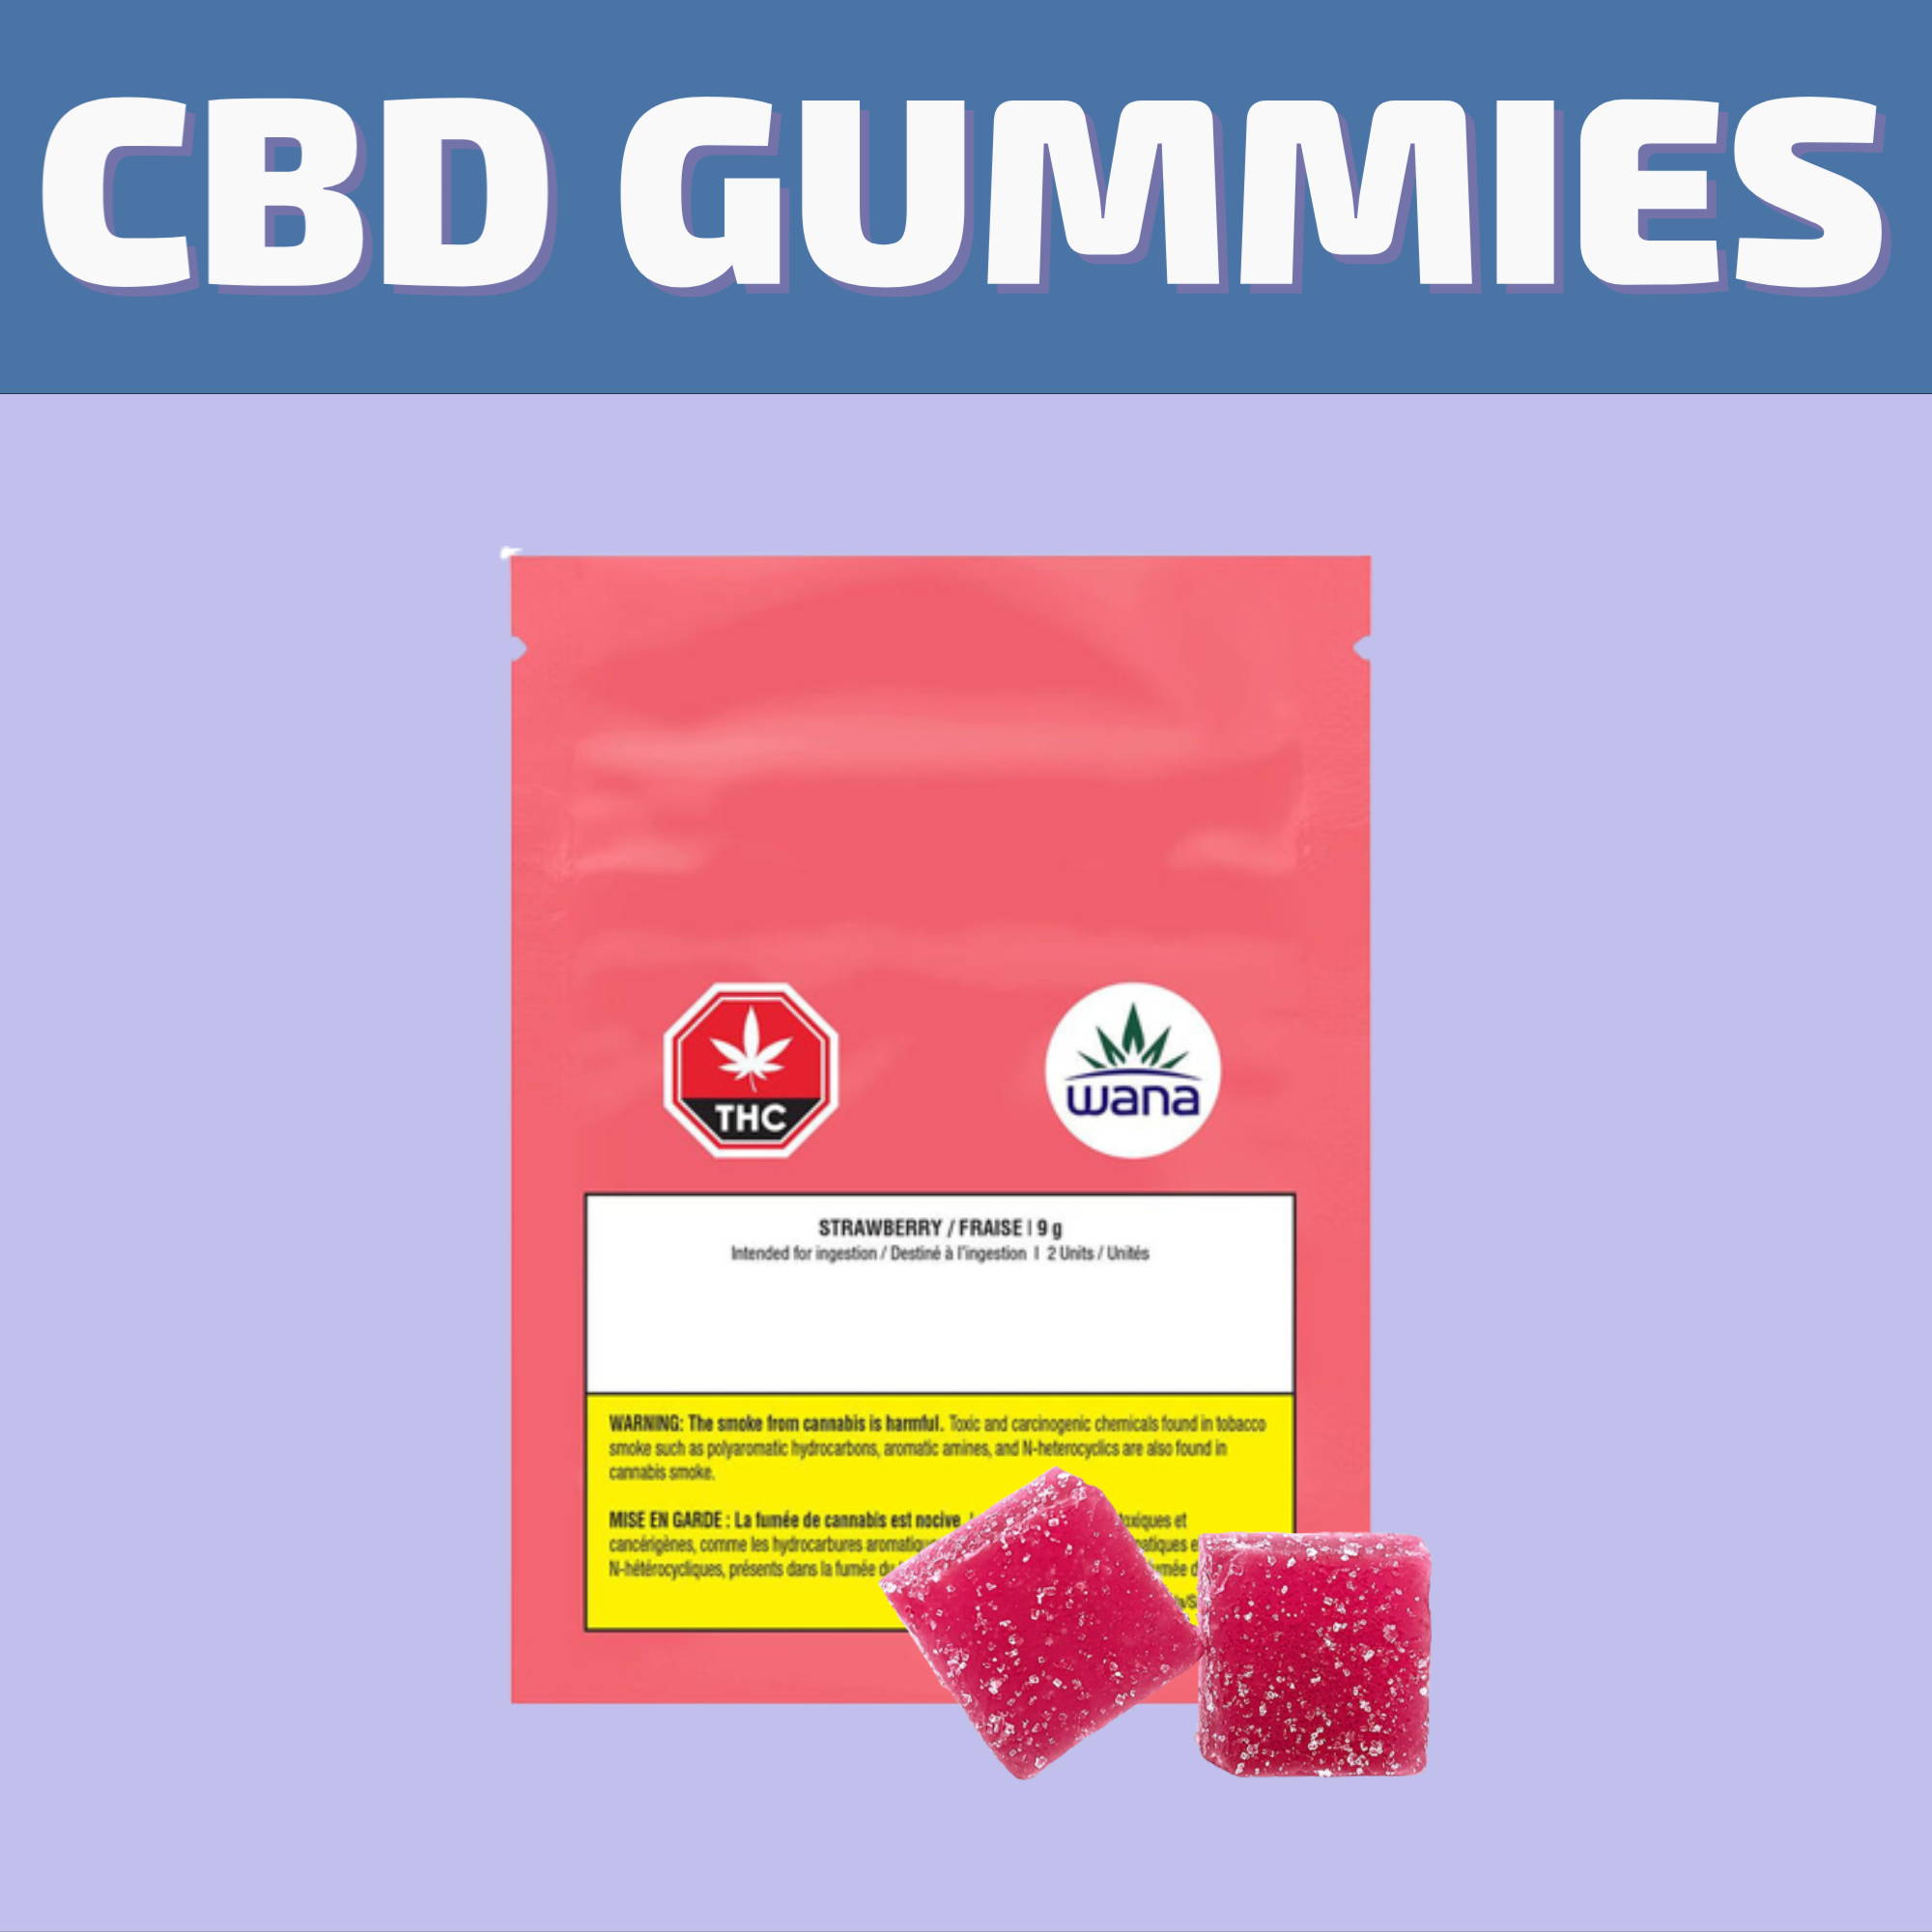 Shop the best selection of CBD Gummies and CBD Oil for same day delivery or pick it up at our dispensary on 580 Academy Road.  